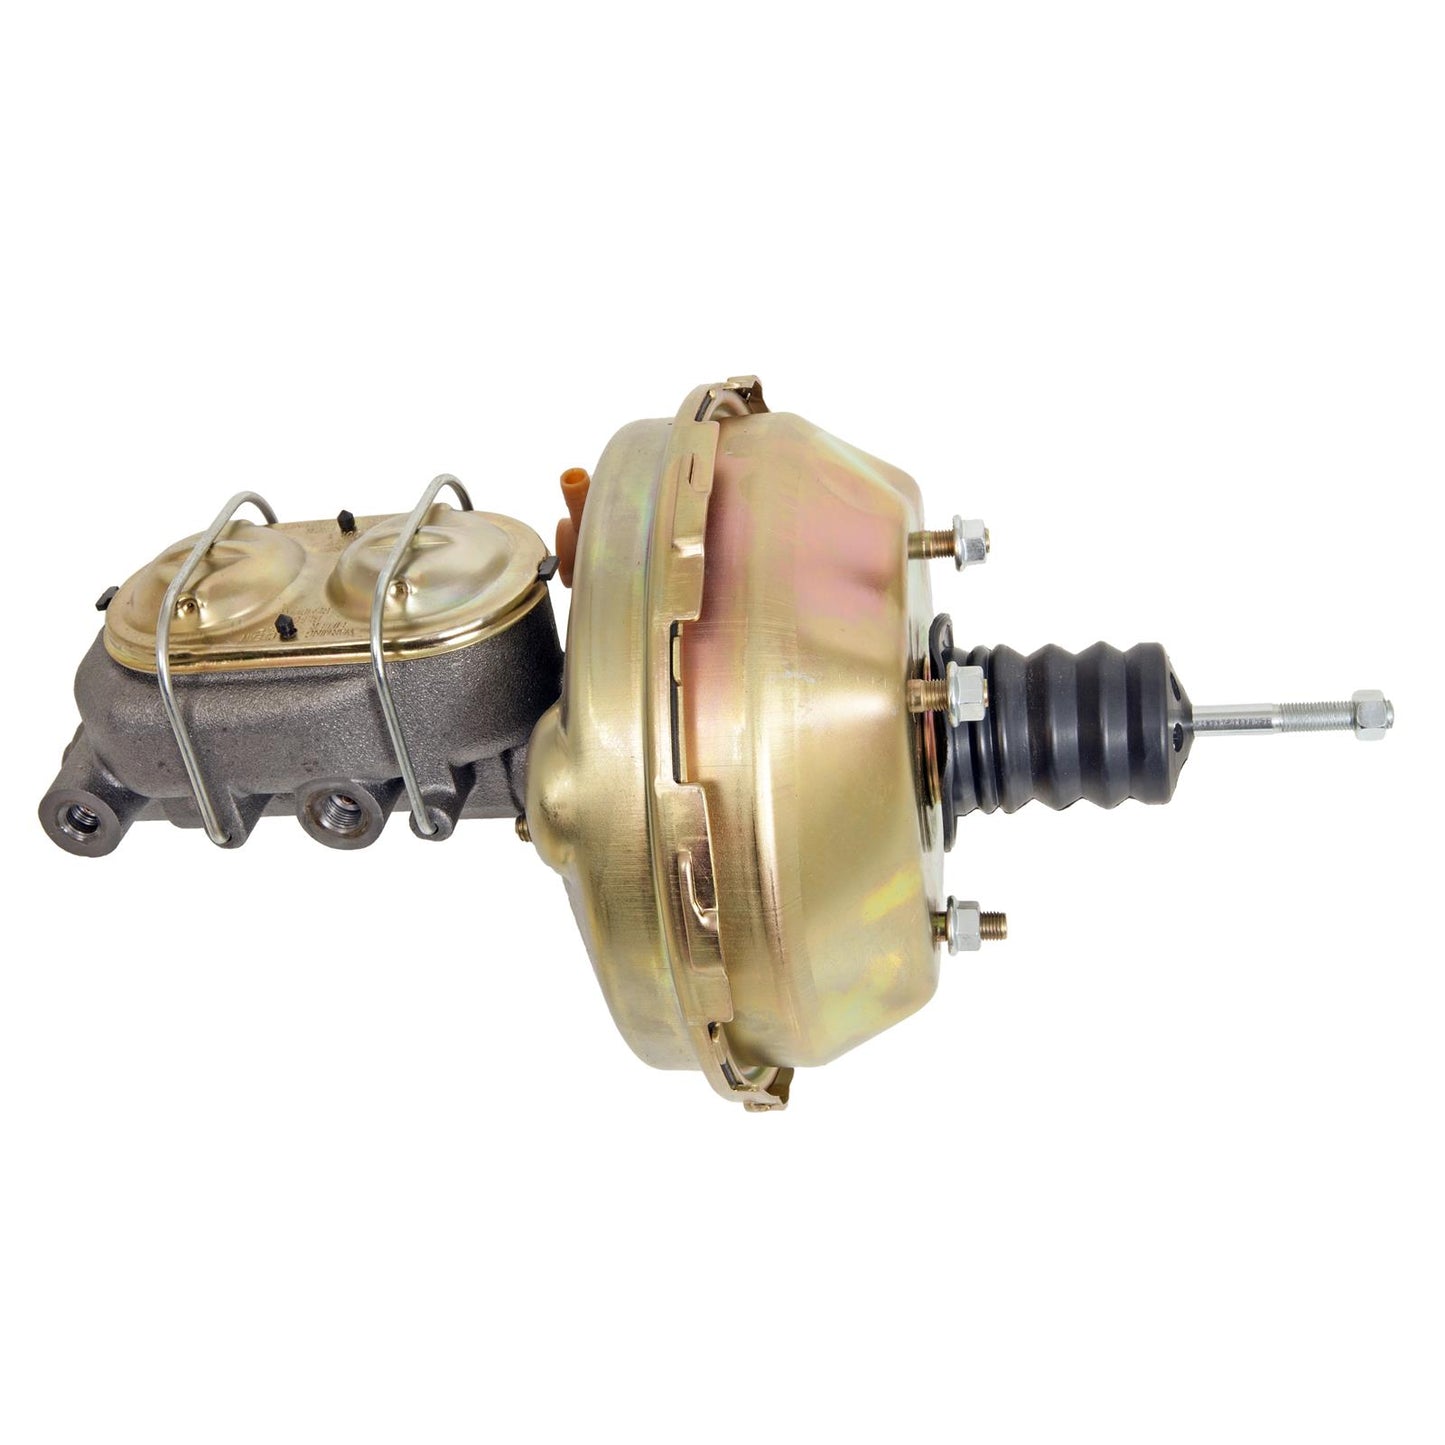 Summit Racing Complete Drum-to-Disk Brake Conversion Kits SUM-BK1515 for Chevrolet 1955-1964